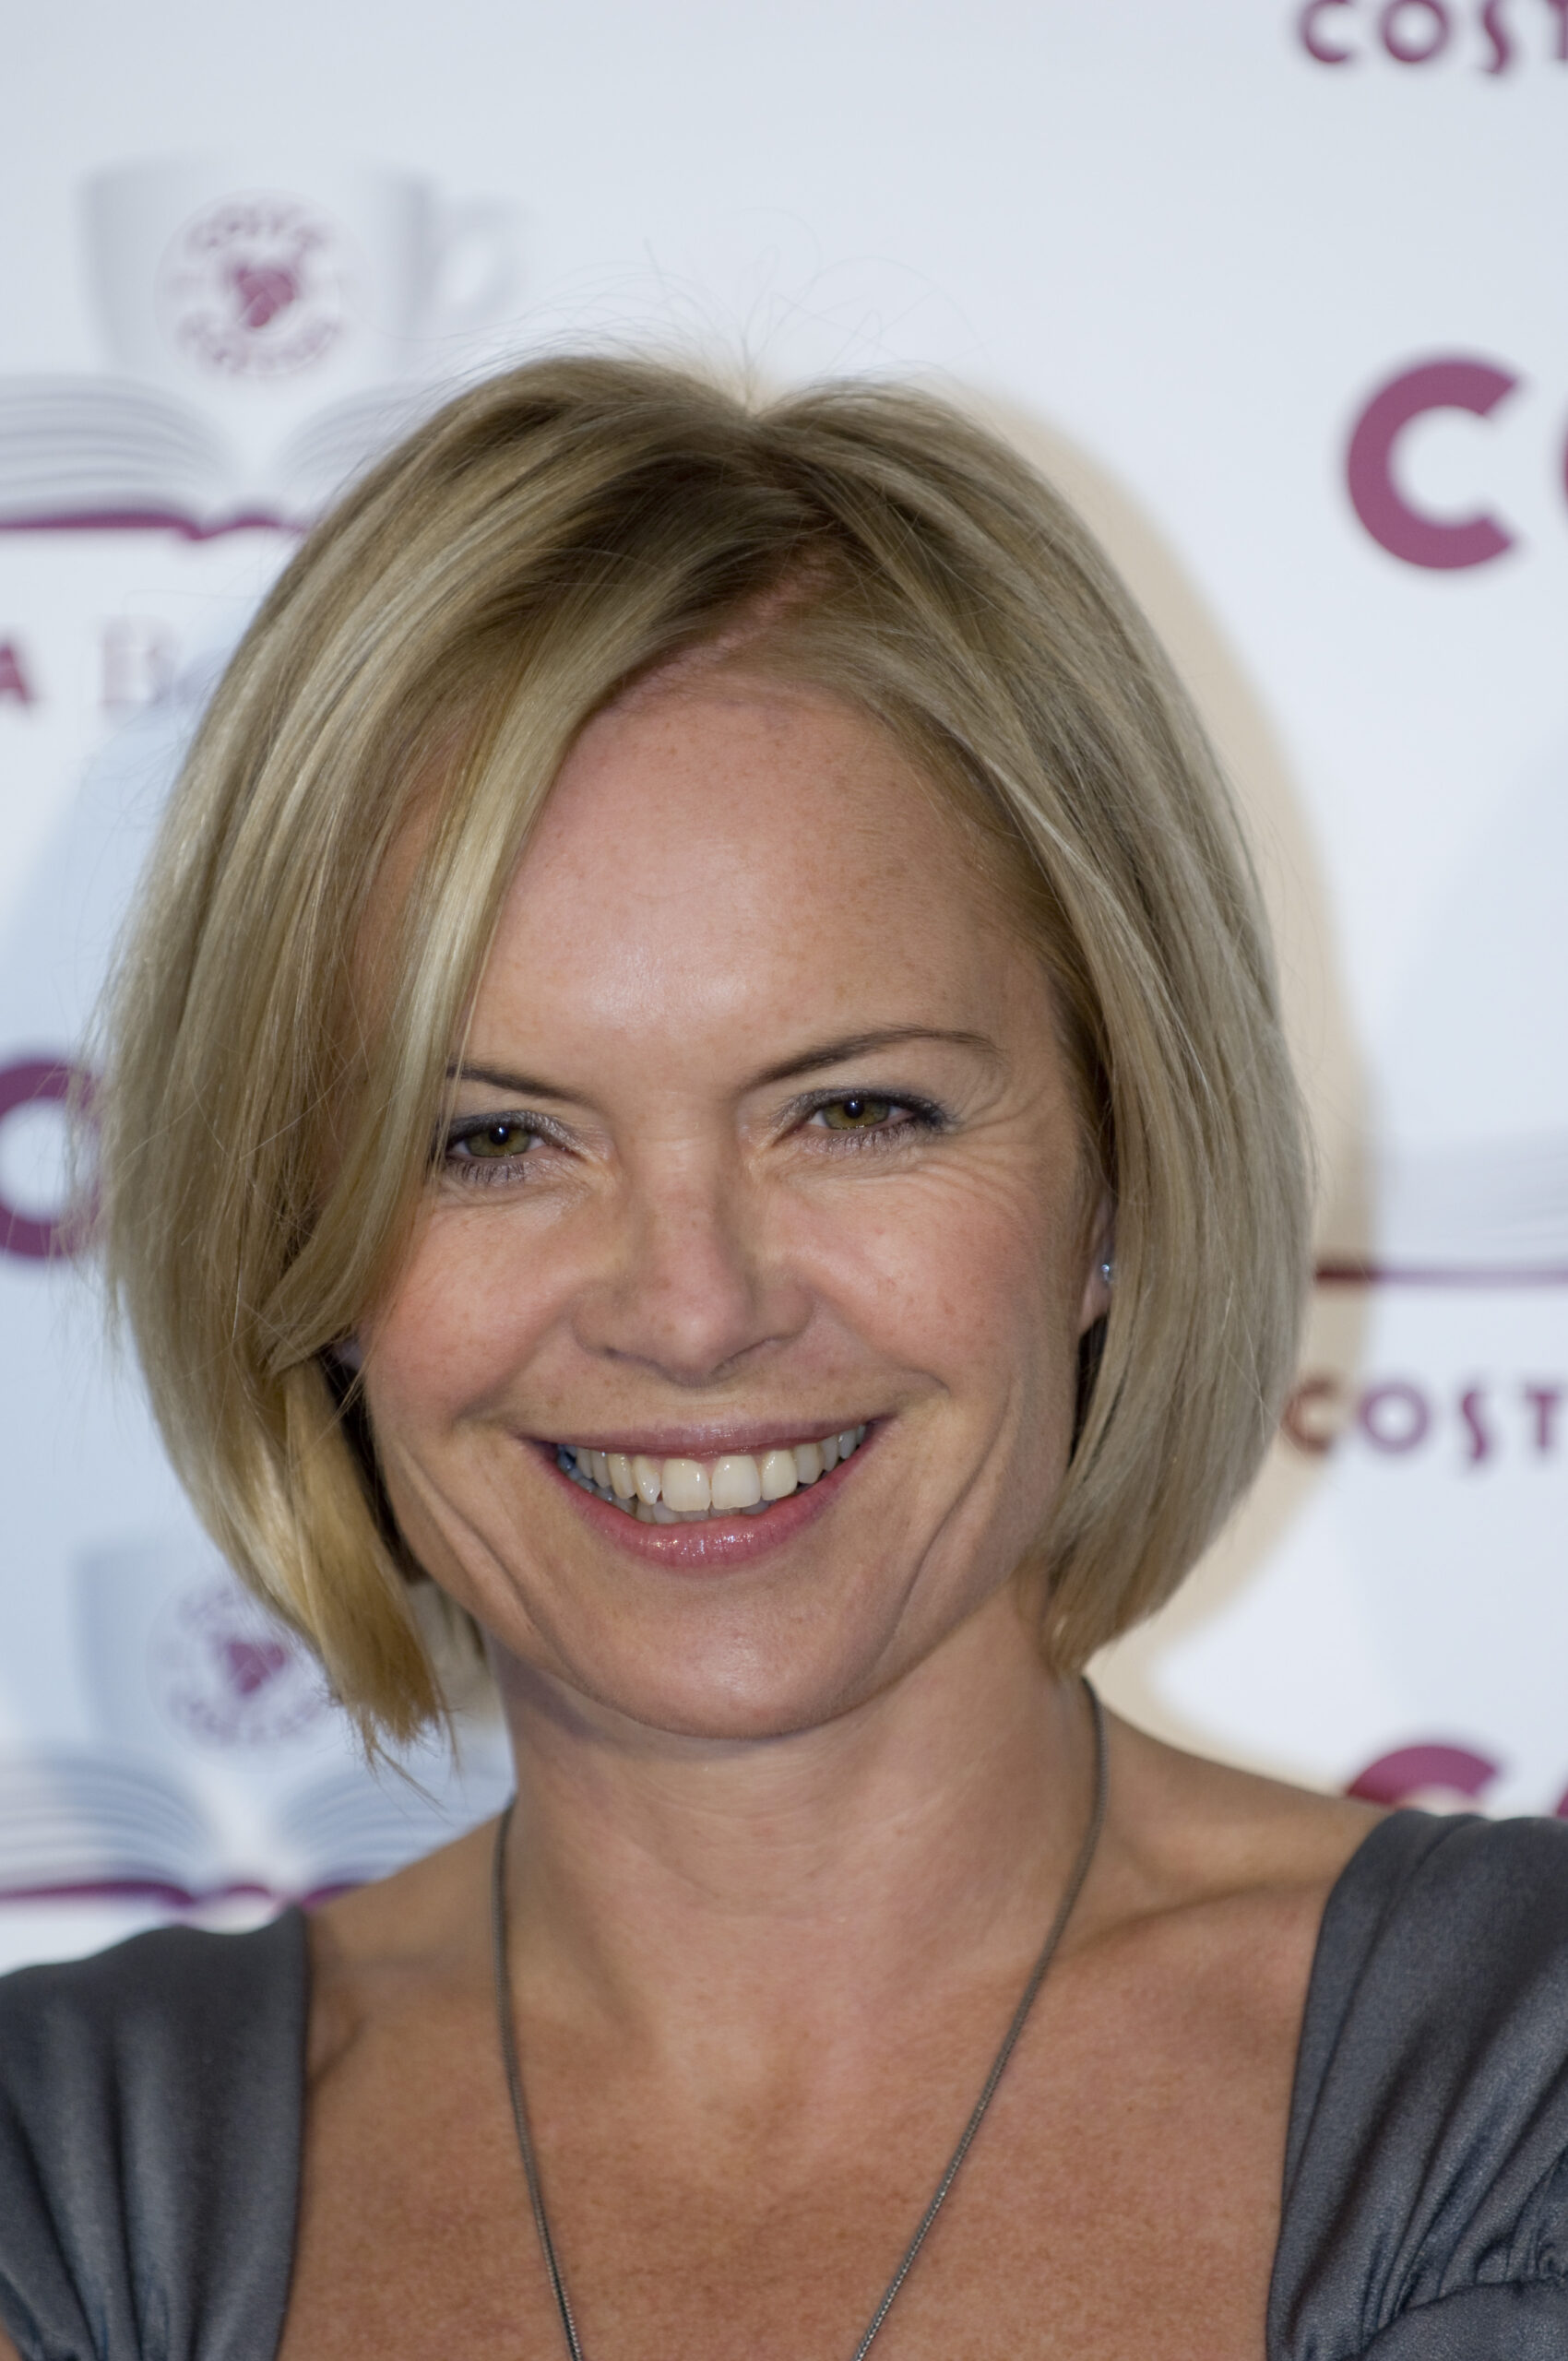 Influencer marketing with Mariella Frostrup as an example